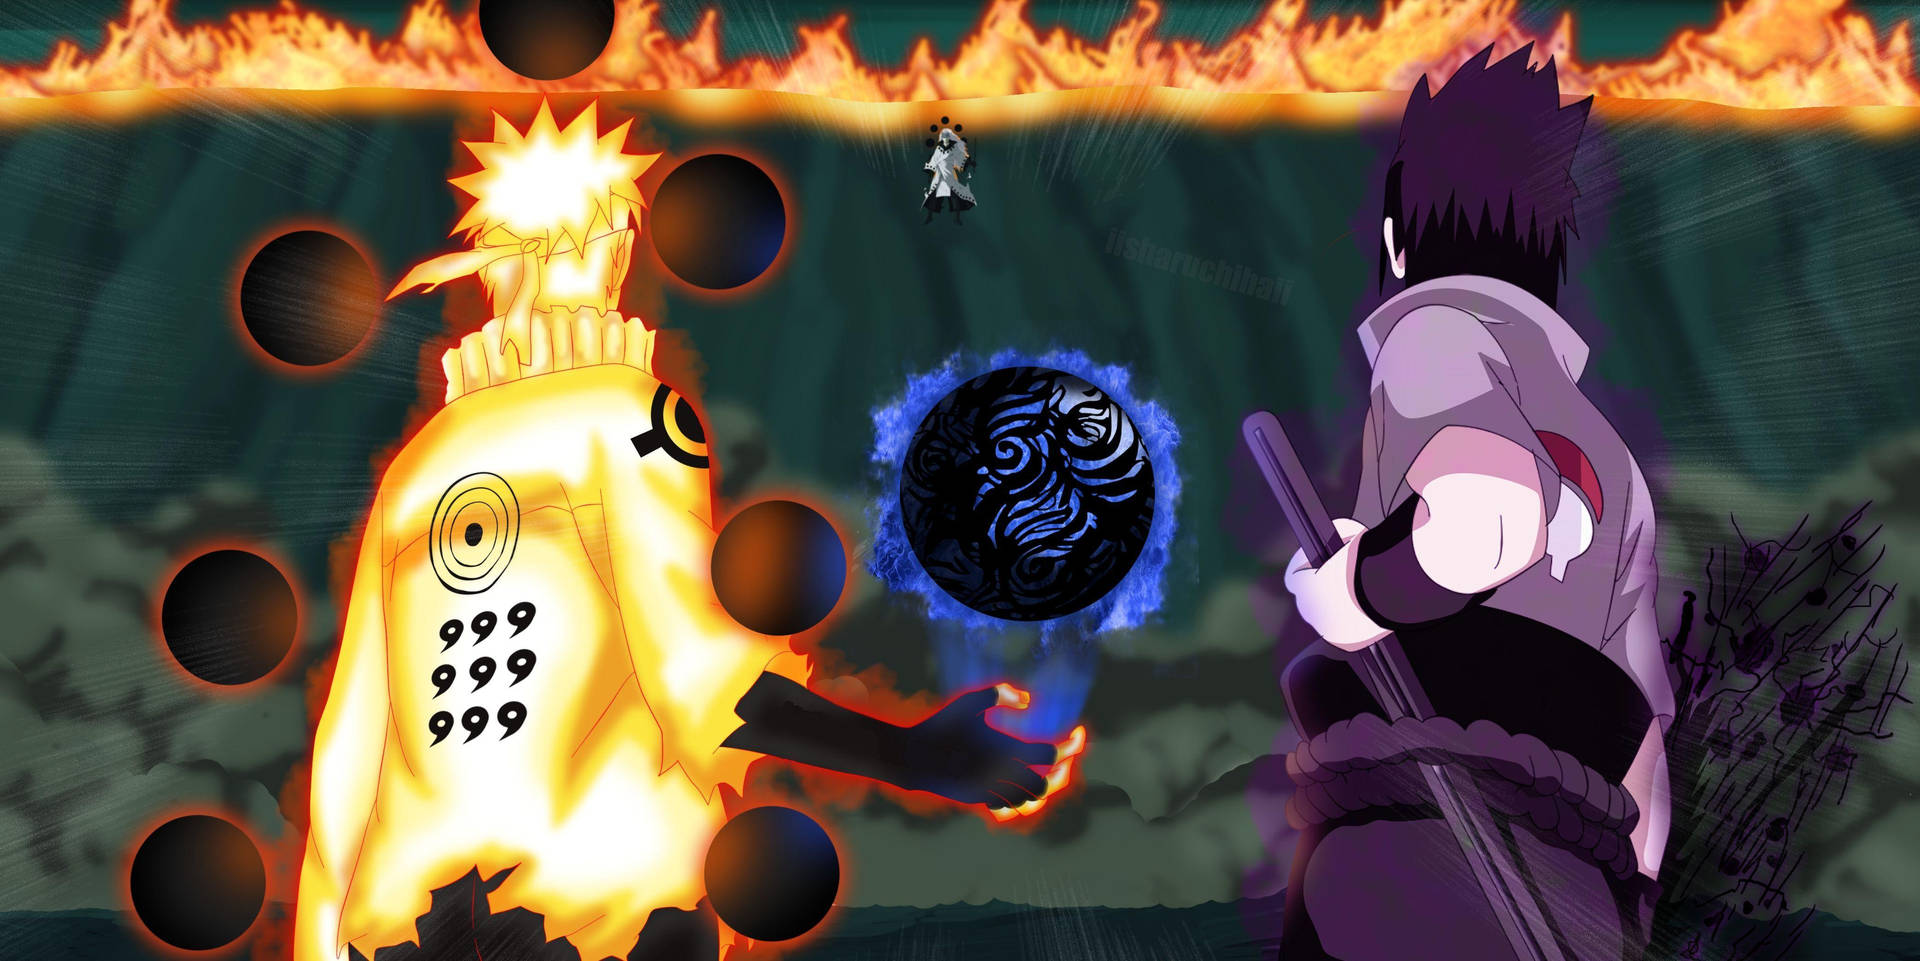 Naruto takes on Uchiha Madara in one of the most iconic battles in Naruto Shippuden Wallpaper